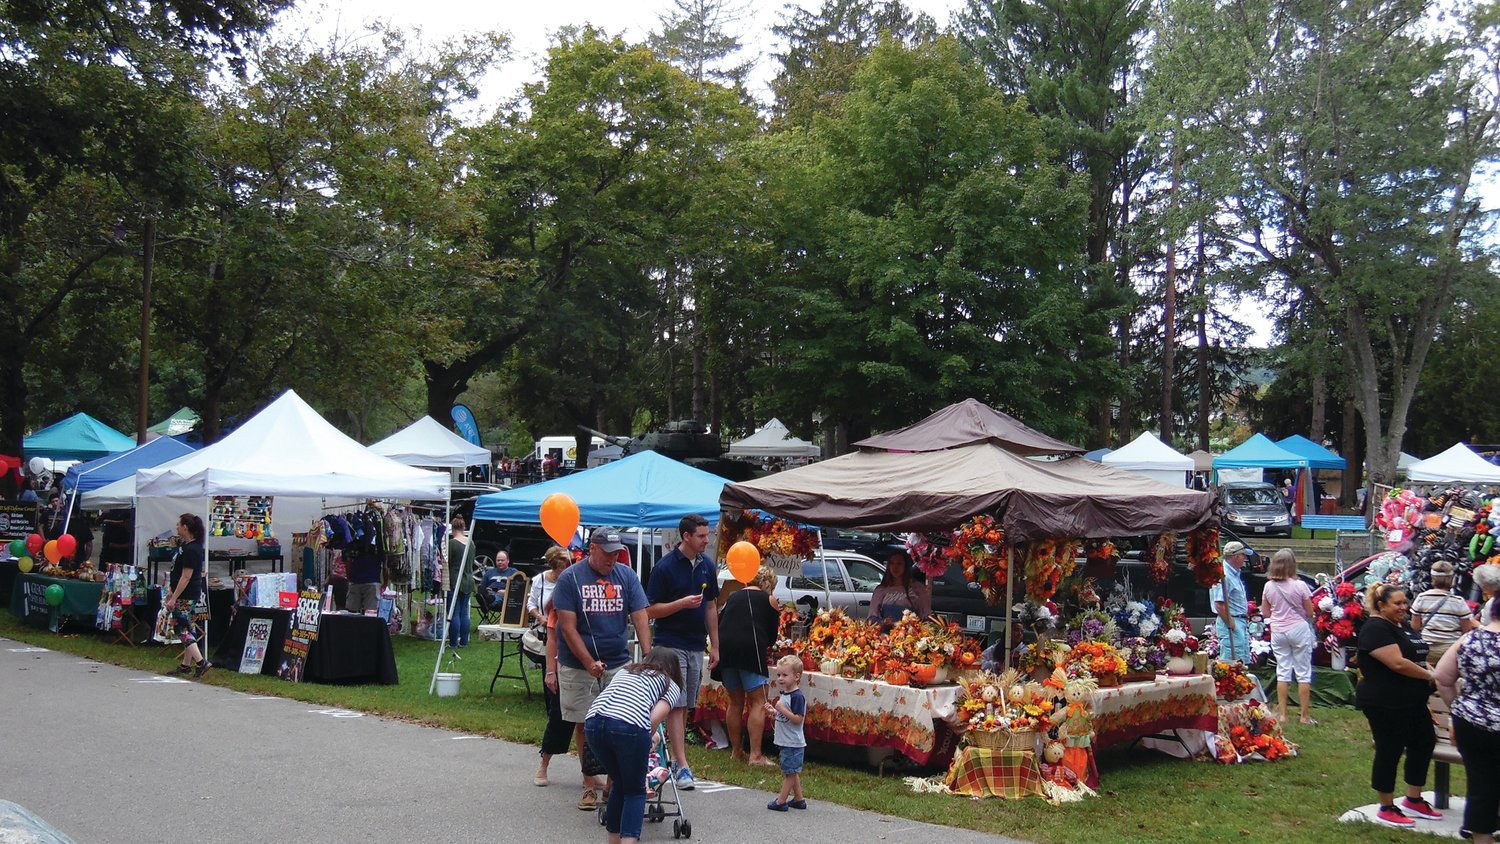 FESTIVALS OF YESTERYEAR: The annual harvest season has arrived. And with the end of summer, the 33rd annual Apple Festival has also returned.